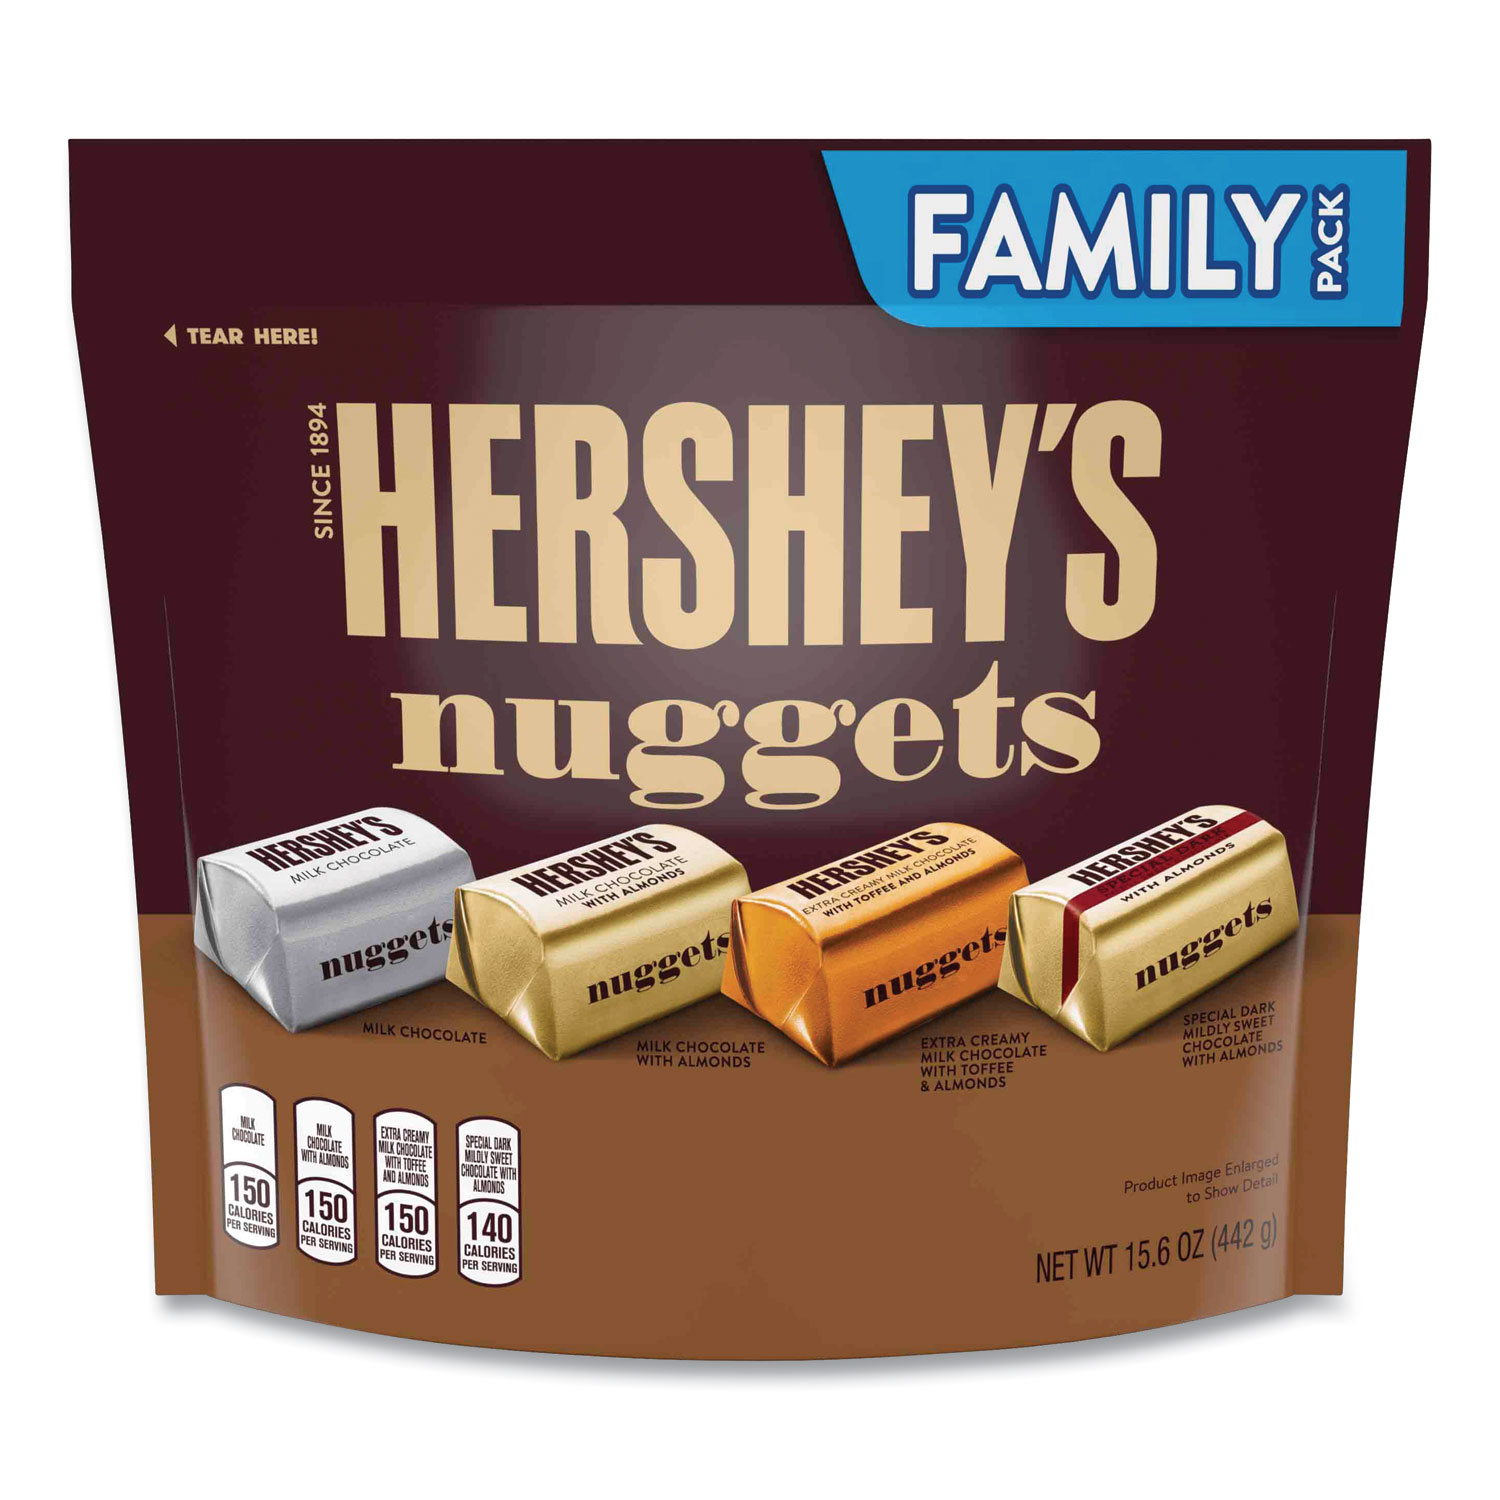  Hershey's 1873 Nuggets Family Pack, Assorted, 15.6 oz Bag, Free Delivery in 1-4 Business Days (GRR24600443) 